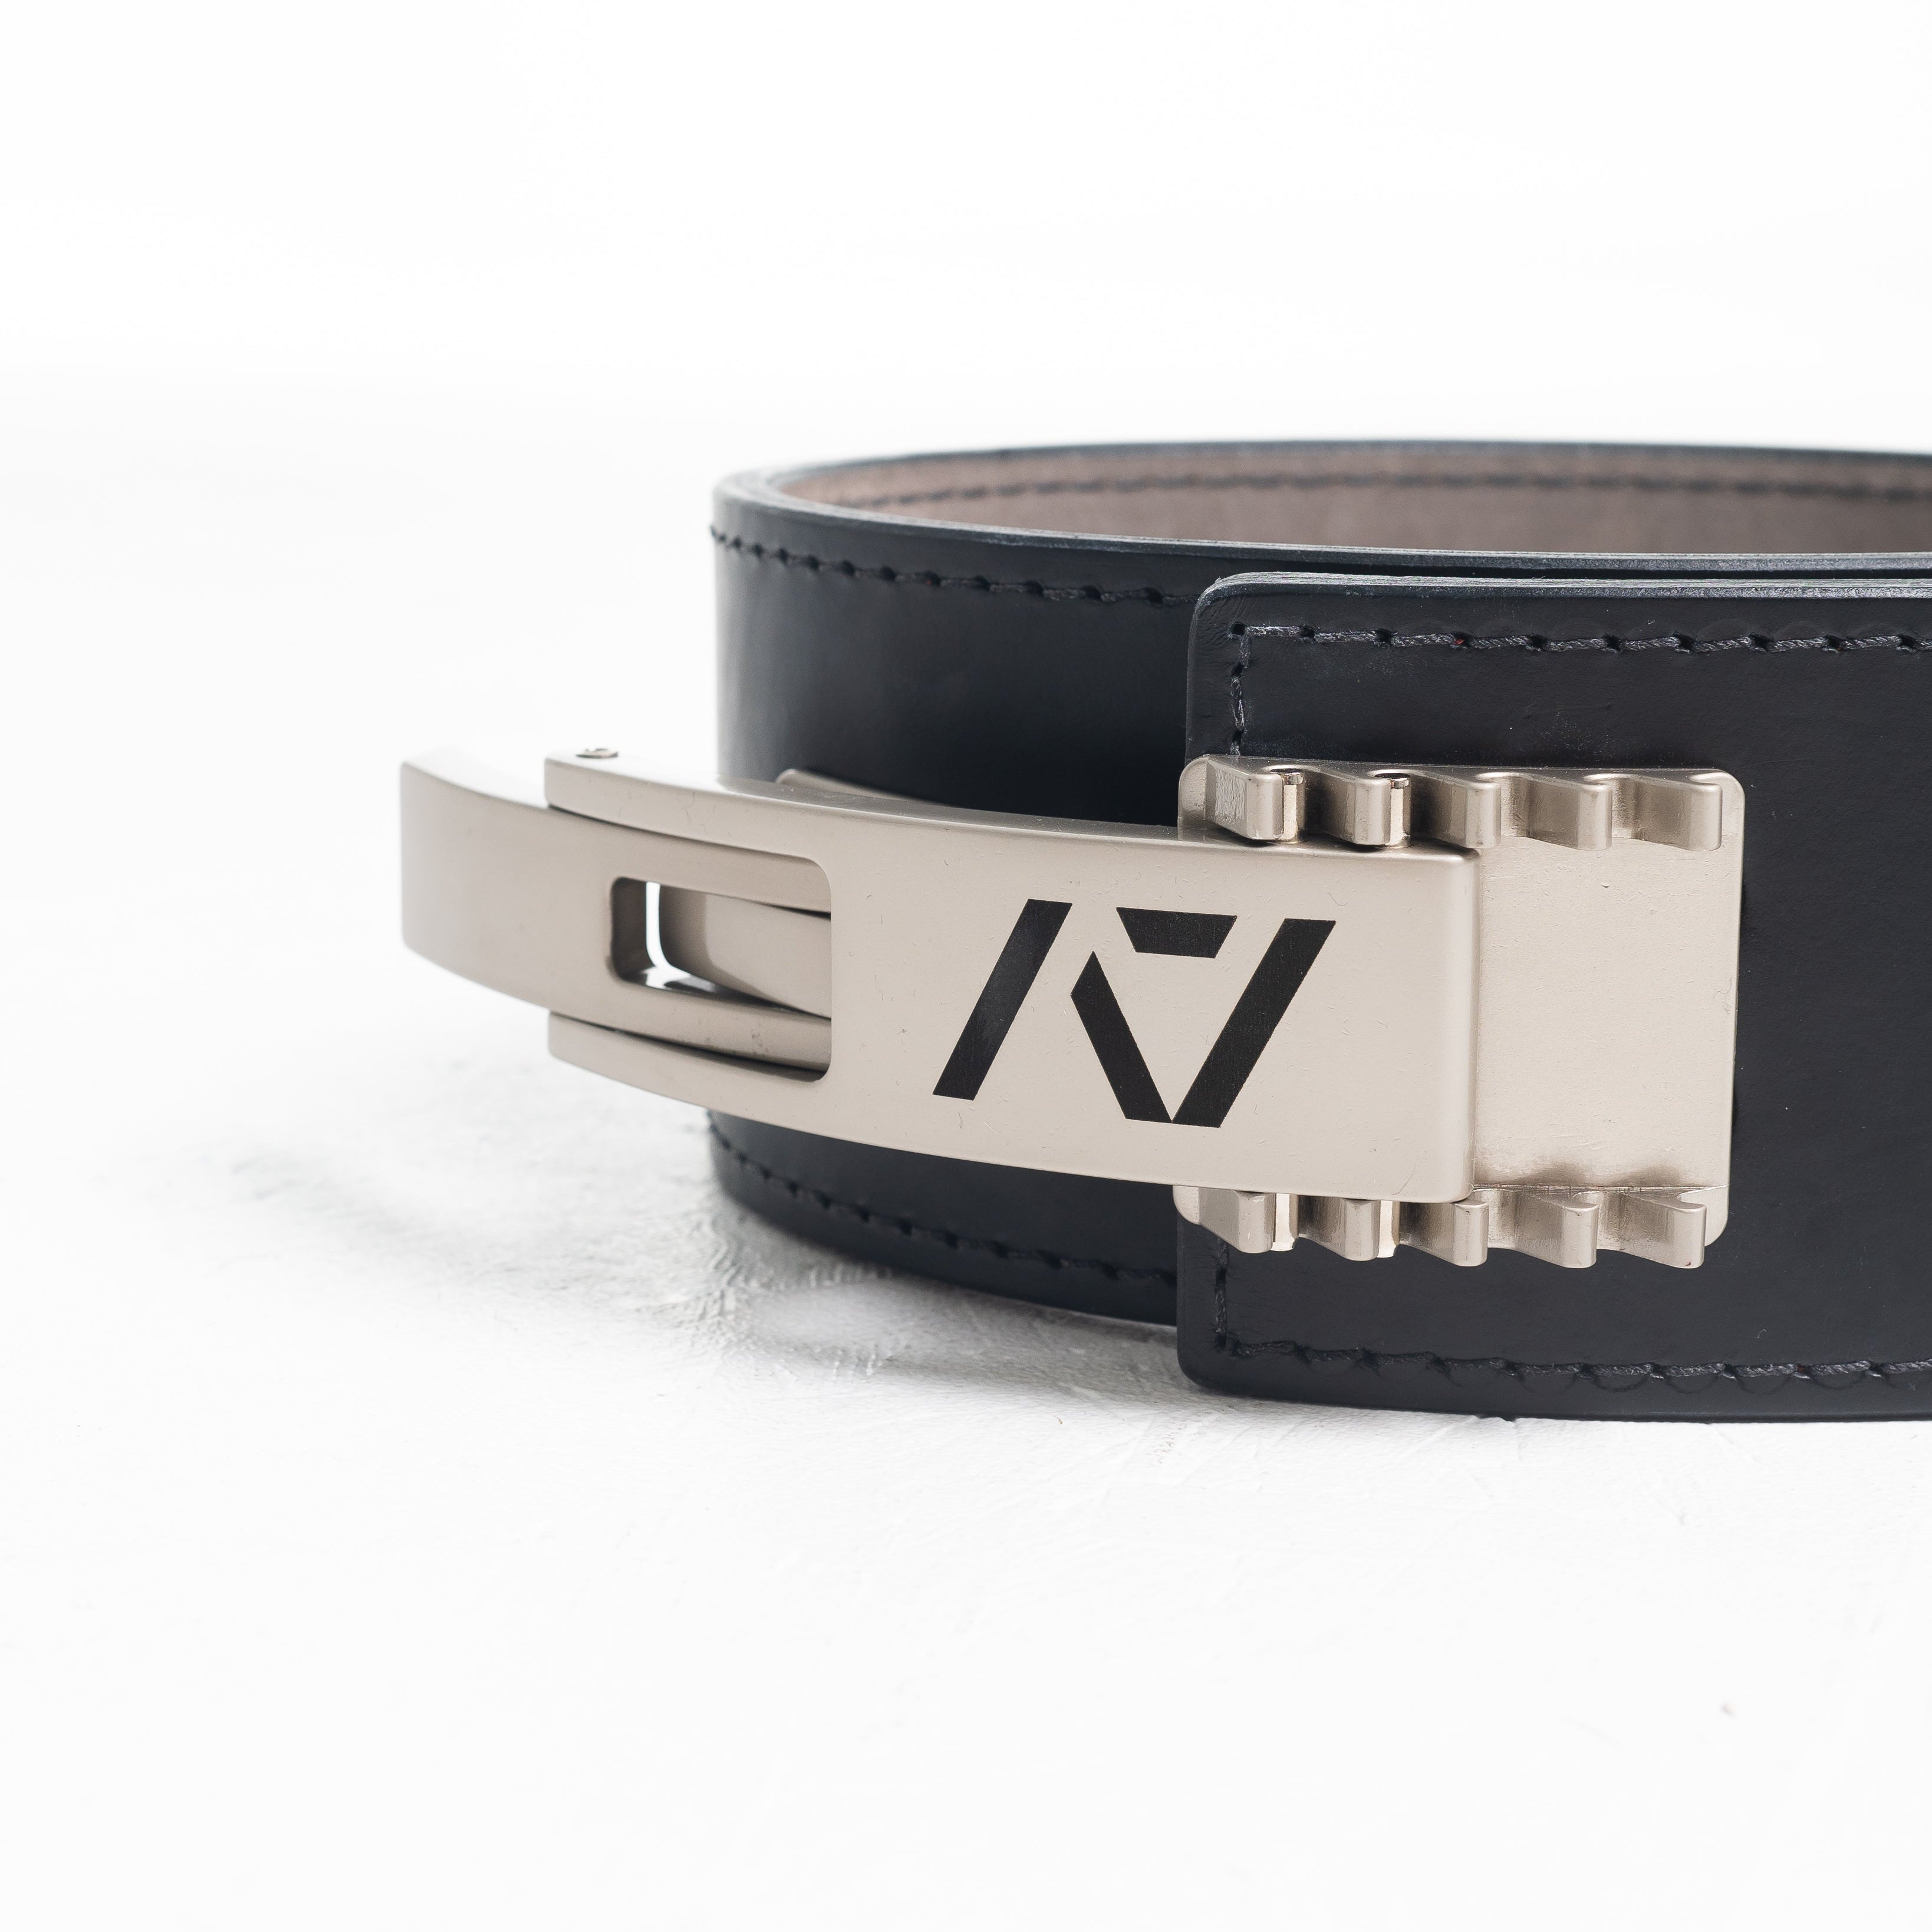 A7 IPF Approved Lever Belt features a black design with black leather, silver engraved buckle and debossed A7 logo on the leather. The new Pioneer Adjustable Lever, PAL, buckle allows you to quickly adjust the tightness of your belt for a perfect fit. The IPF Approved Kit includes Singlet, A7 Meet Shirt, A7 Zebra Wrist Wraps, A7 Deadlift Socks, Hourglass Knee Sleeves (Stiff Knee Sleeves and Rigor Mortis Knee Sleeves). All A7 Powerlifting Equipment shipping to UK, Norway, Switzerland and Iceland.